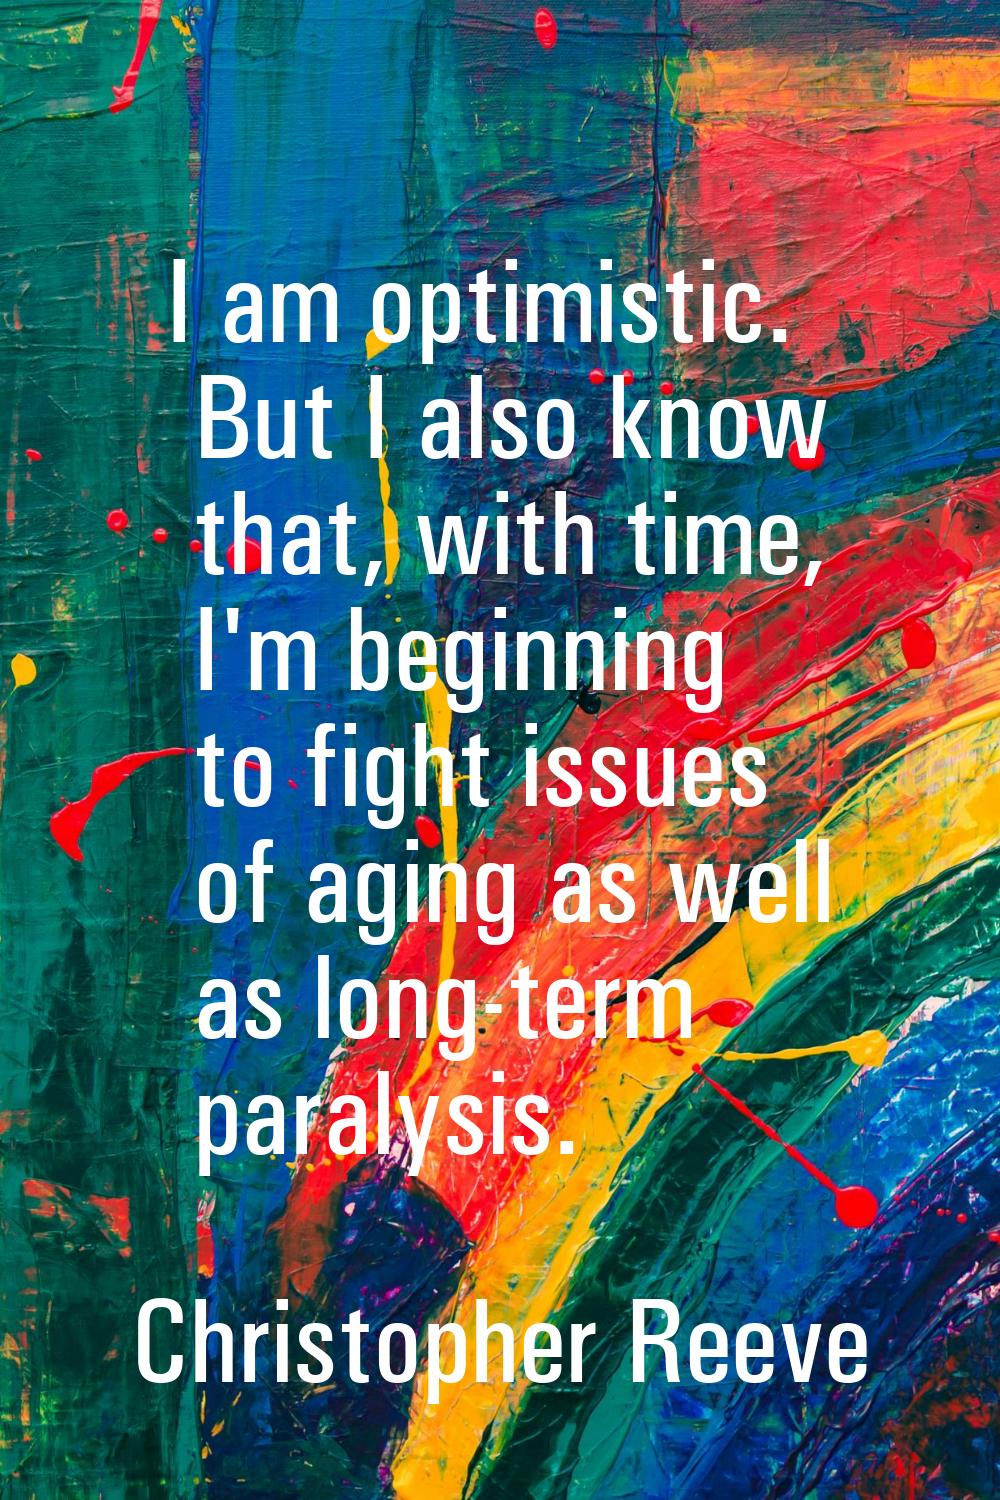 I am optimistic. But I also know that, with time, I'm beginning to fight issues of aging as well as